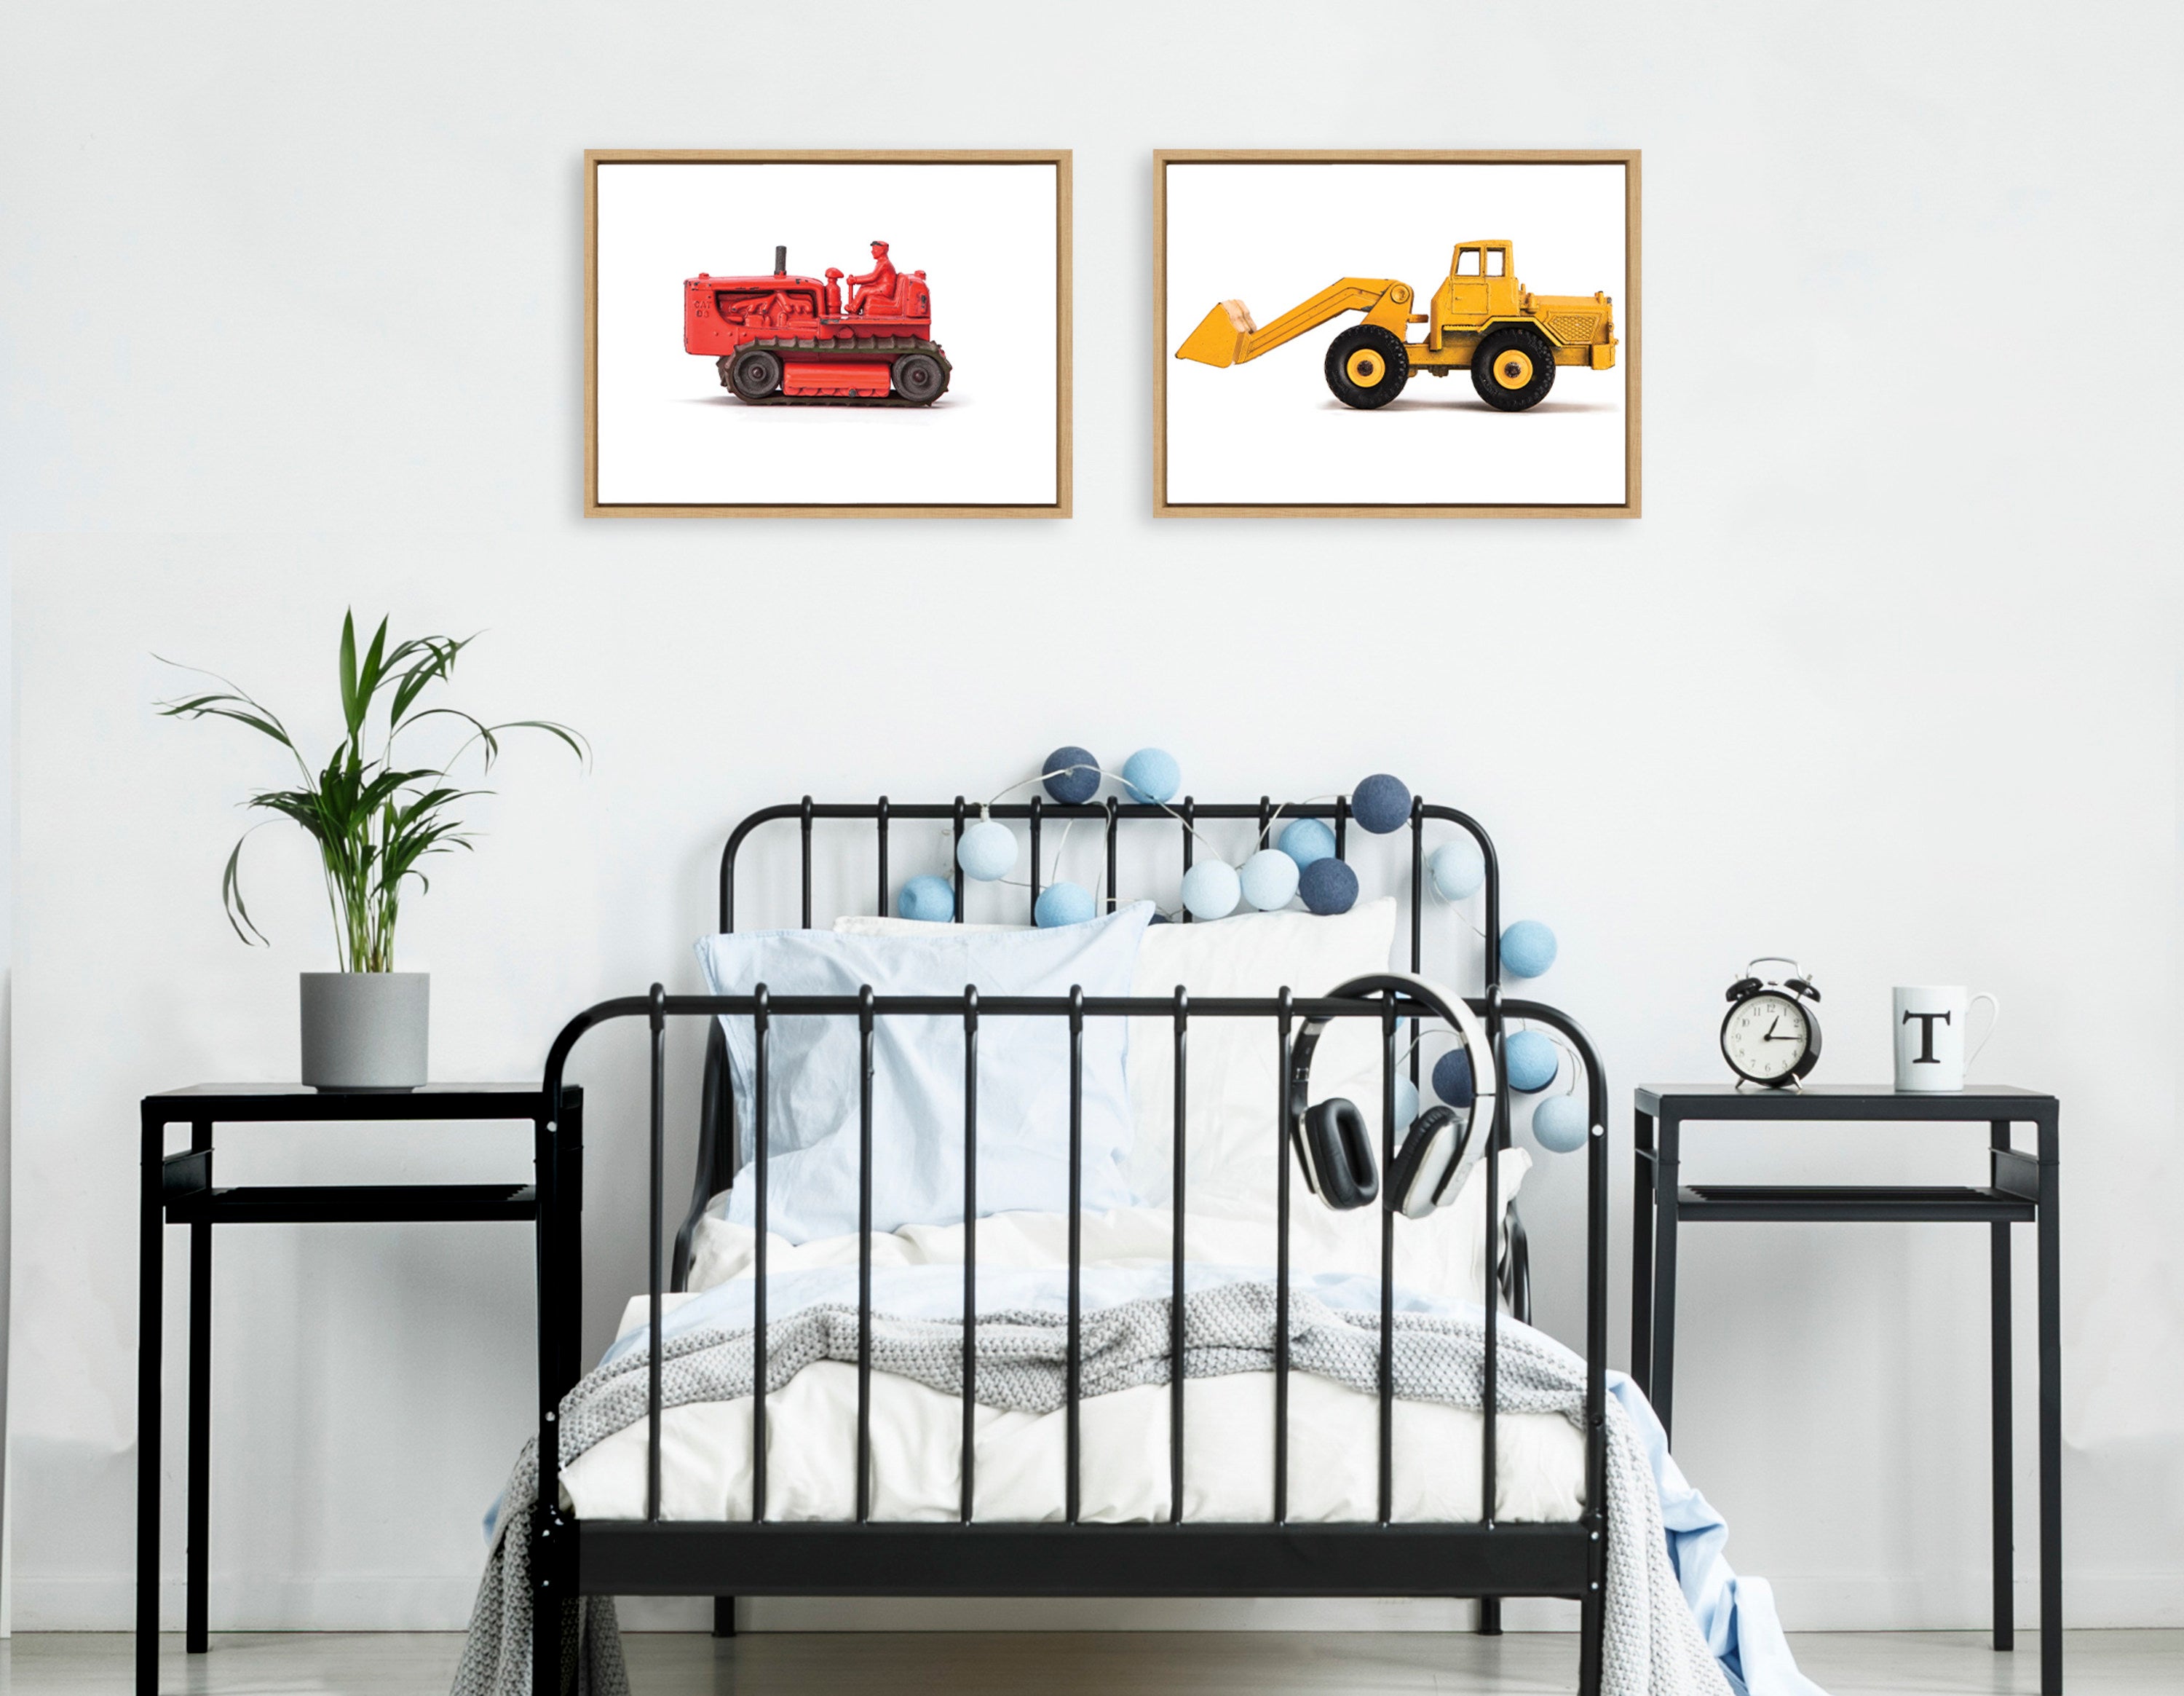 Sylvie Vintage Toy Bulldozer Red and Vintage Toy Front End Loader Yellow Framed Canvas Art Set by Saint and Sailor Studios